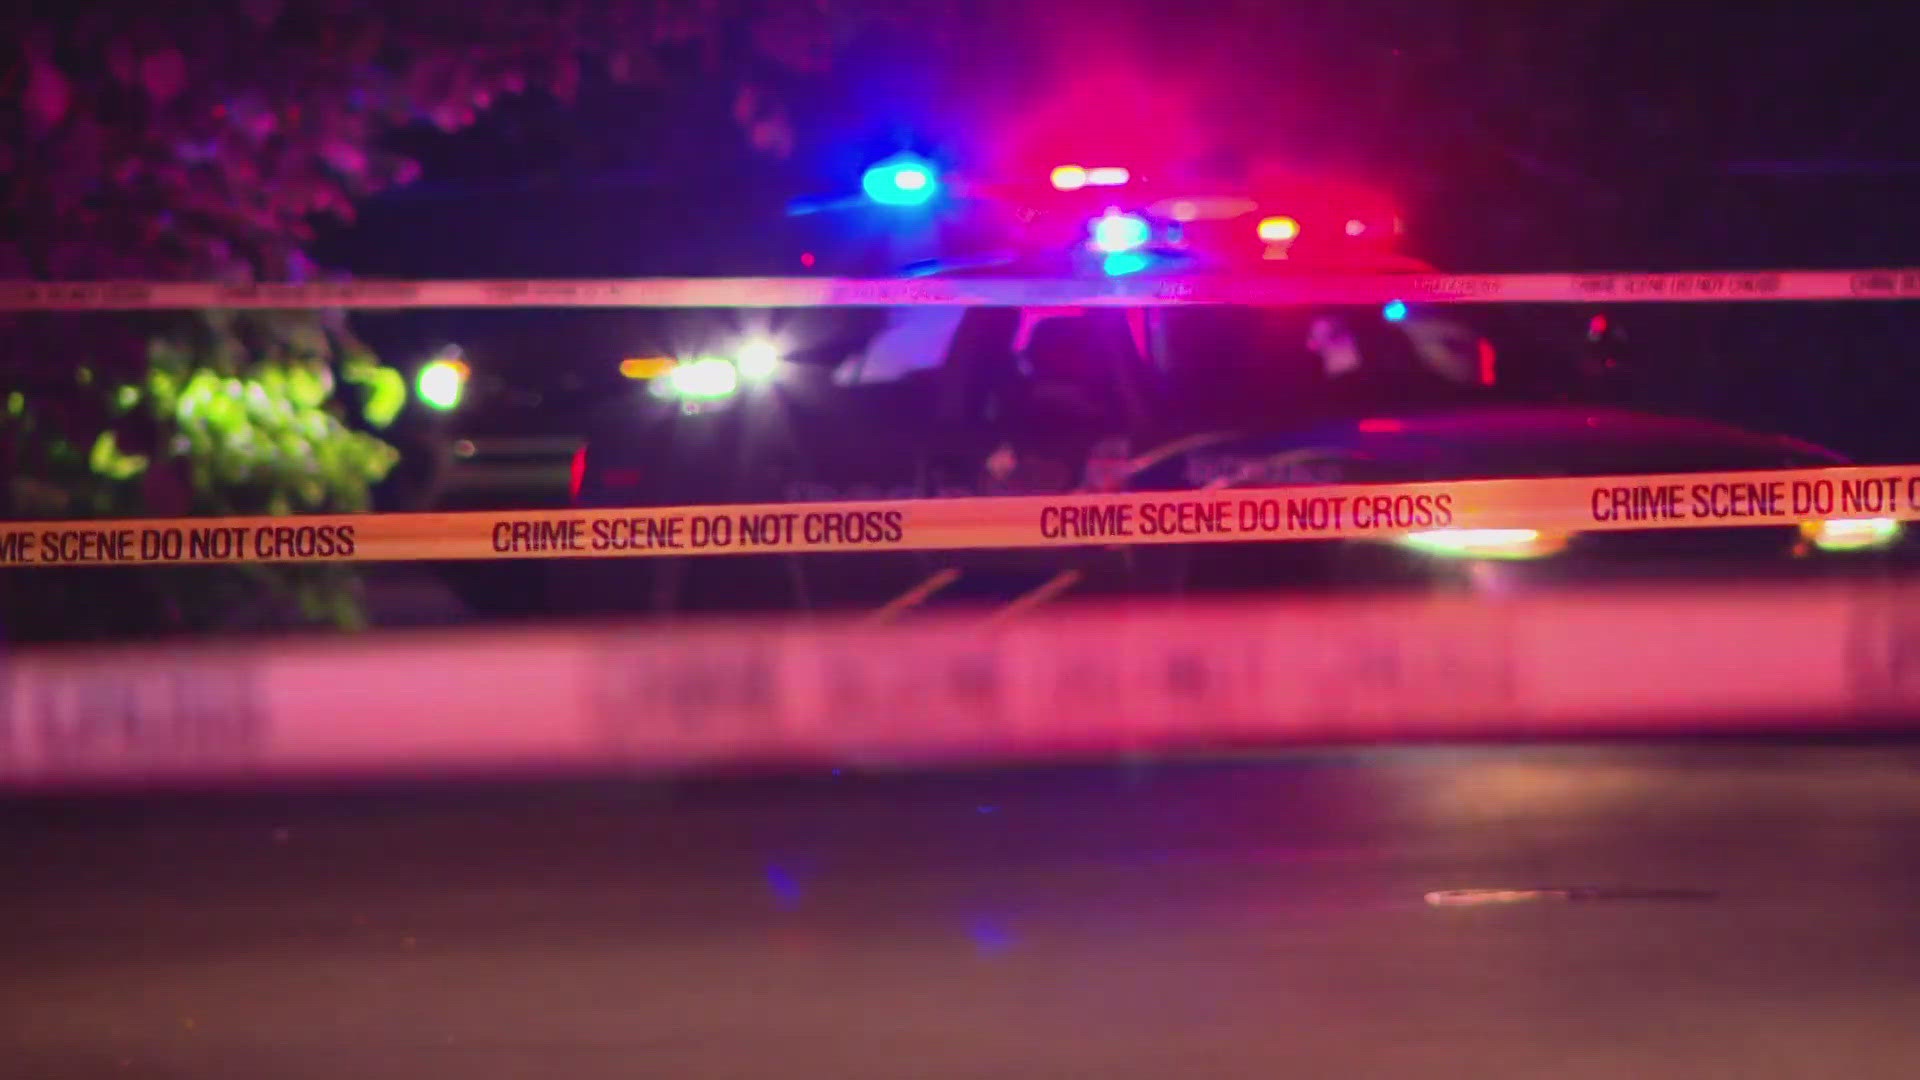 Police said the victim was found shot and lying in the street on North 20th near Lytle Street Tuesday night.